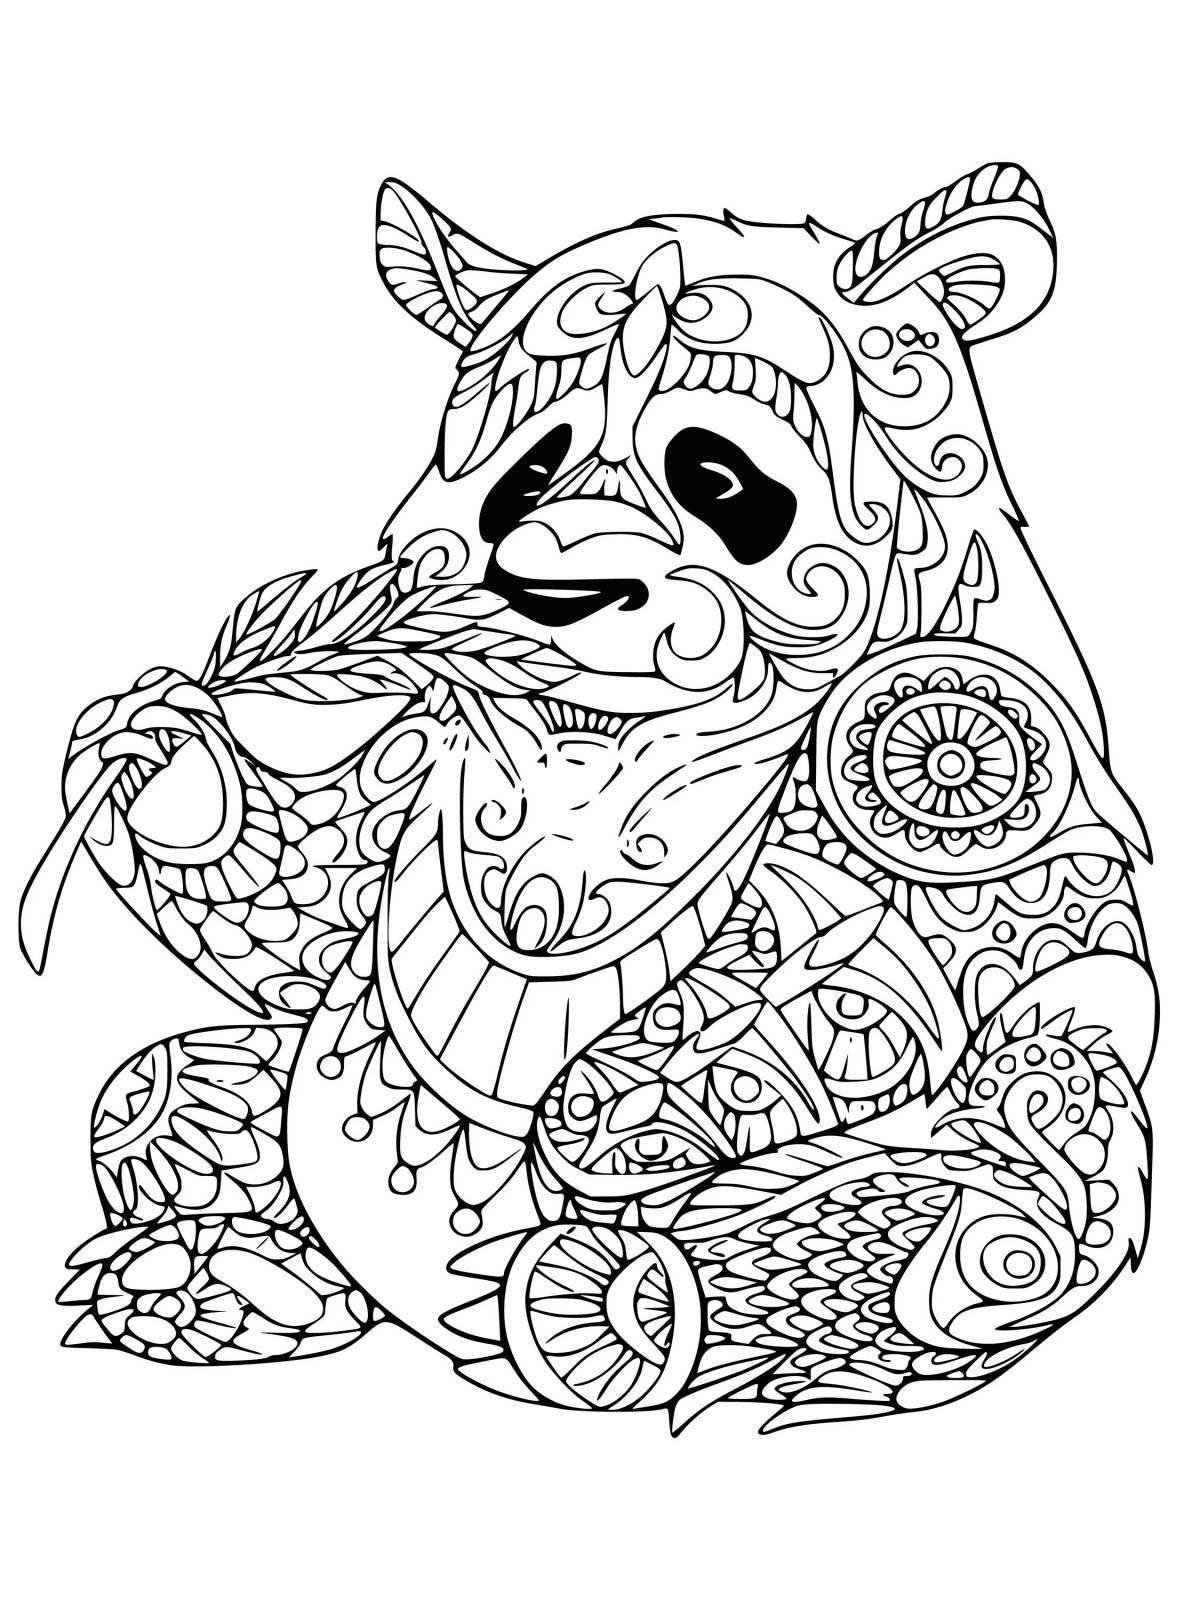 Exotic coloring pages for girls 11 years old animals